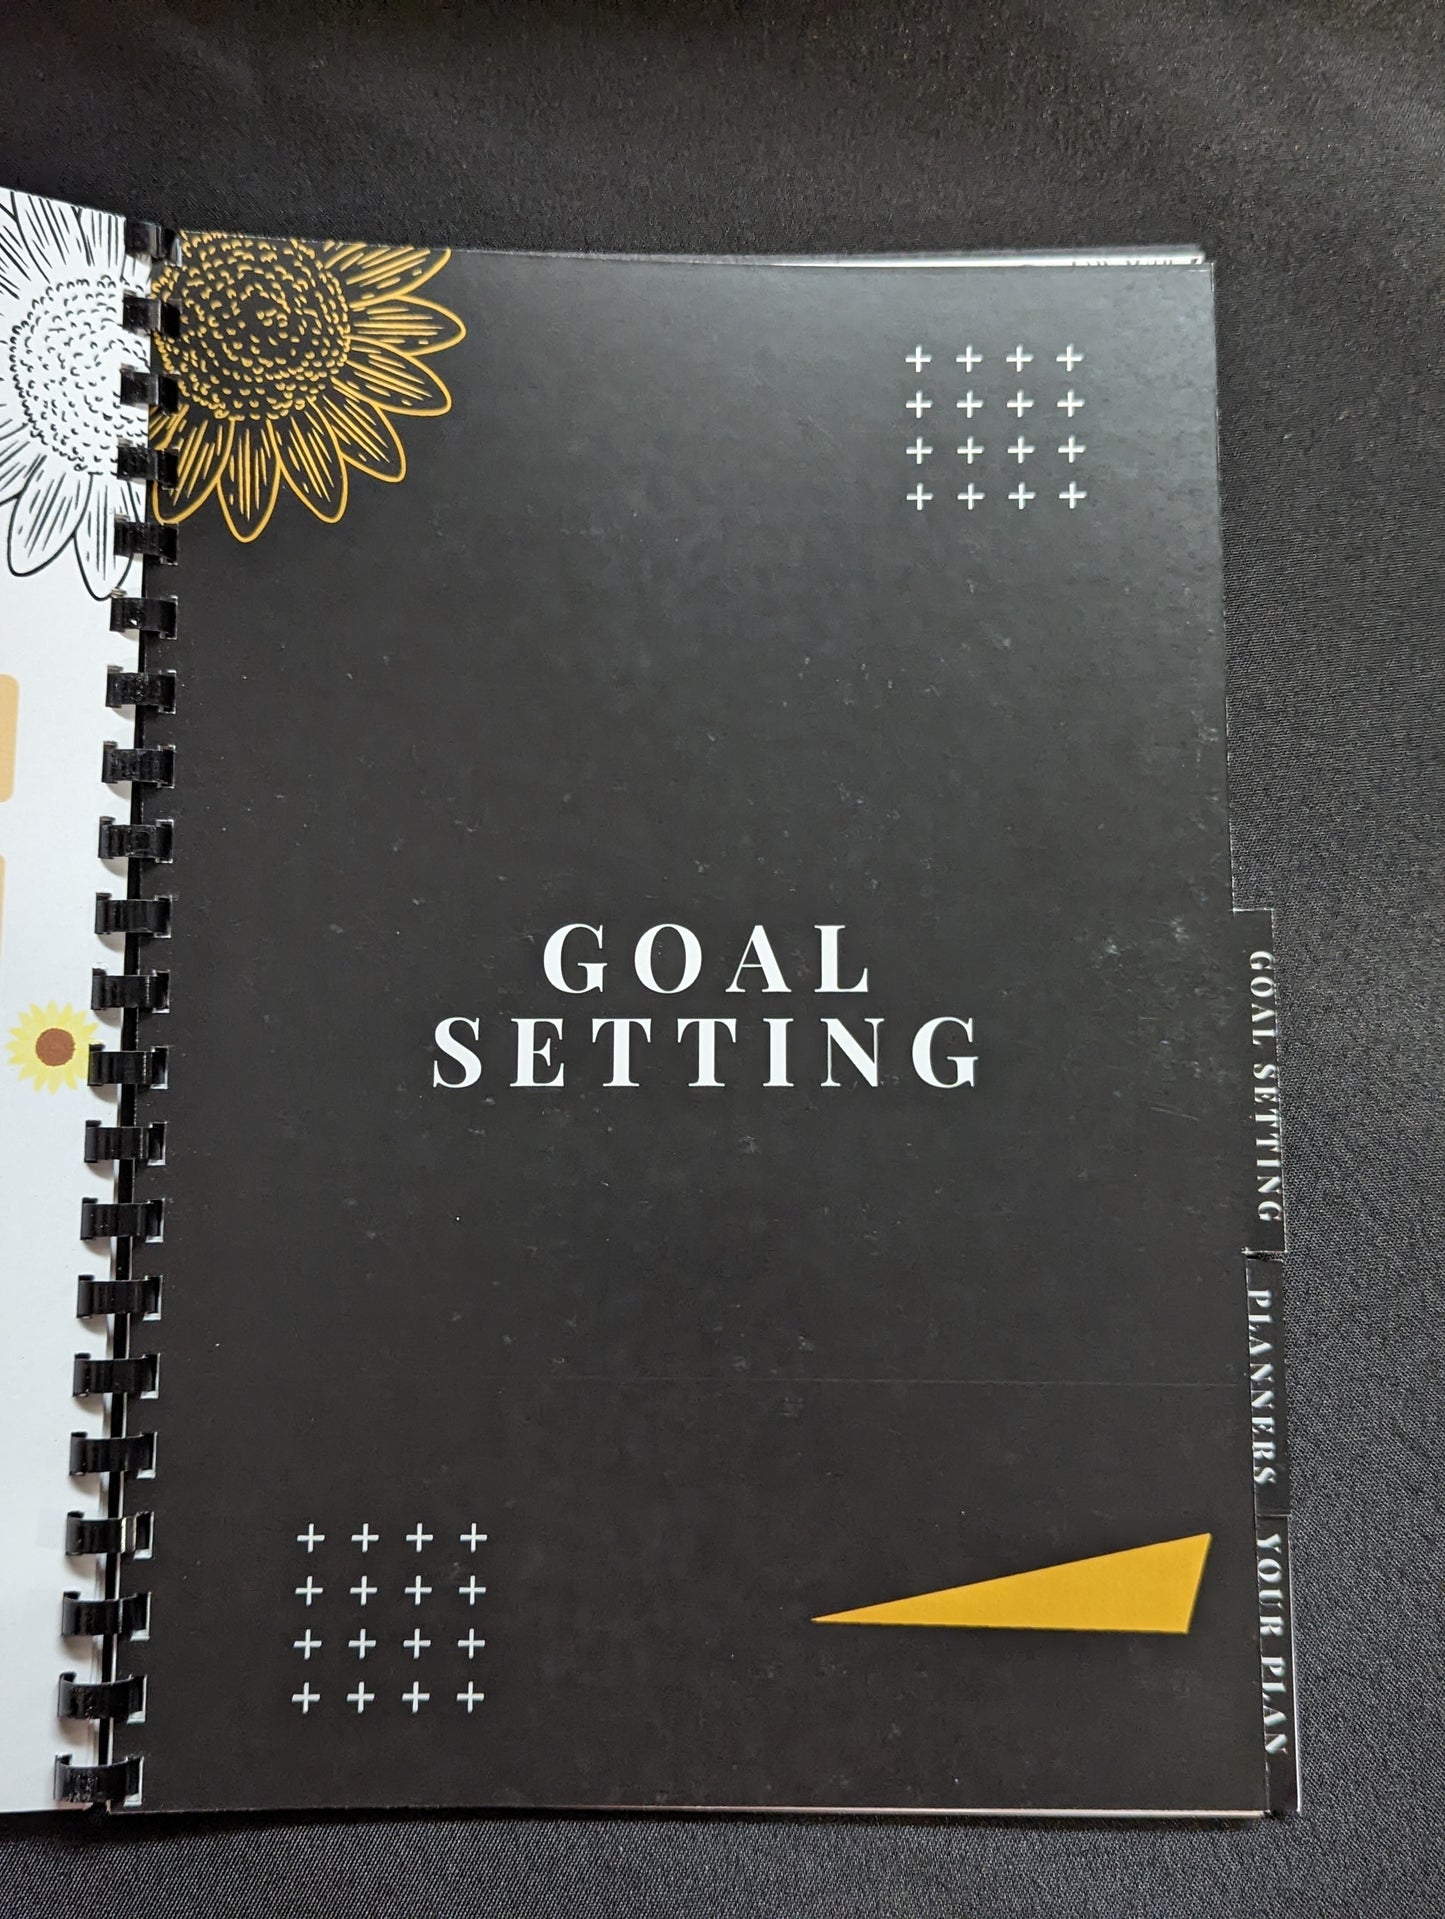 Goal Setting Support Pack